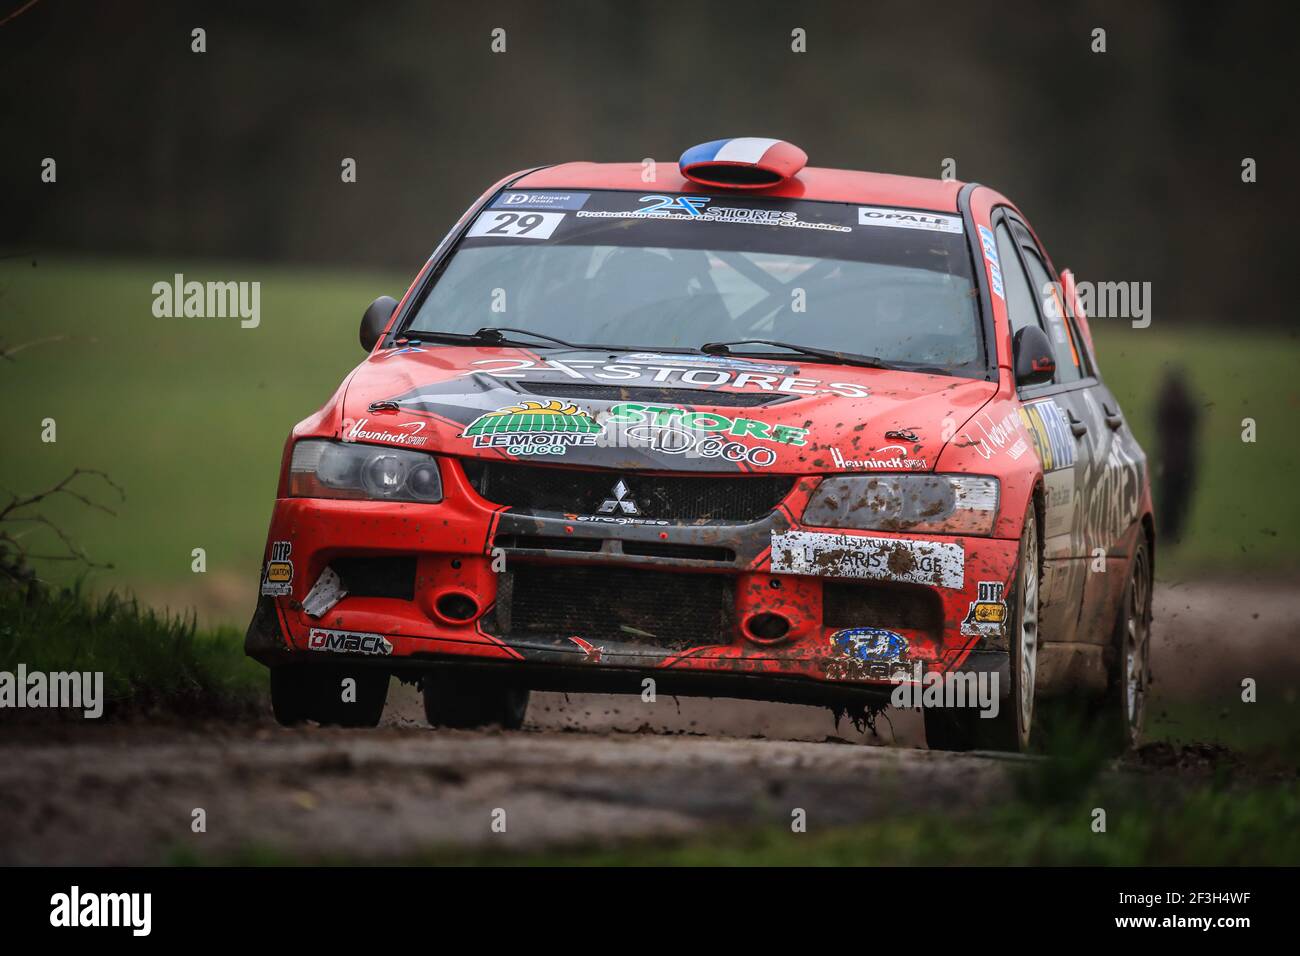 29 HEUNINCK Victorien, LEFEBVRE Yohan, TEAM FJ, Mitsubishi Lancer Evo IX, action during the 2019 French rally championship, rallye du Touquet from March 14 to 16 at Le Touquet, France - Photo Gregory Lenormand / DPPI Stock Photo